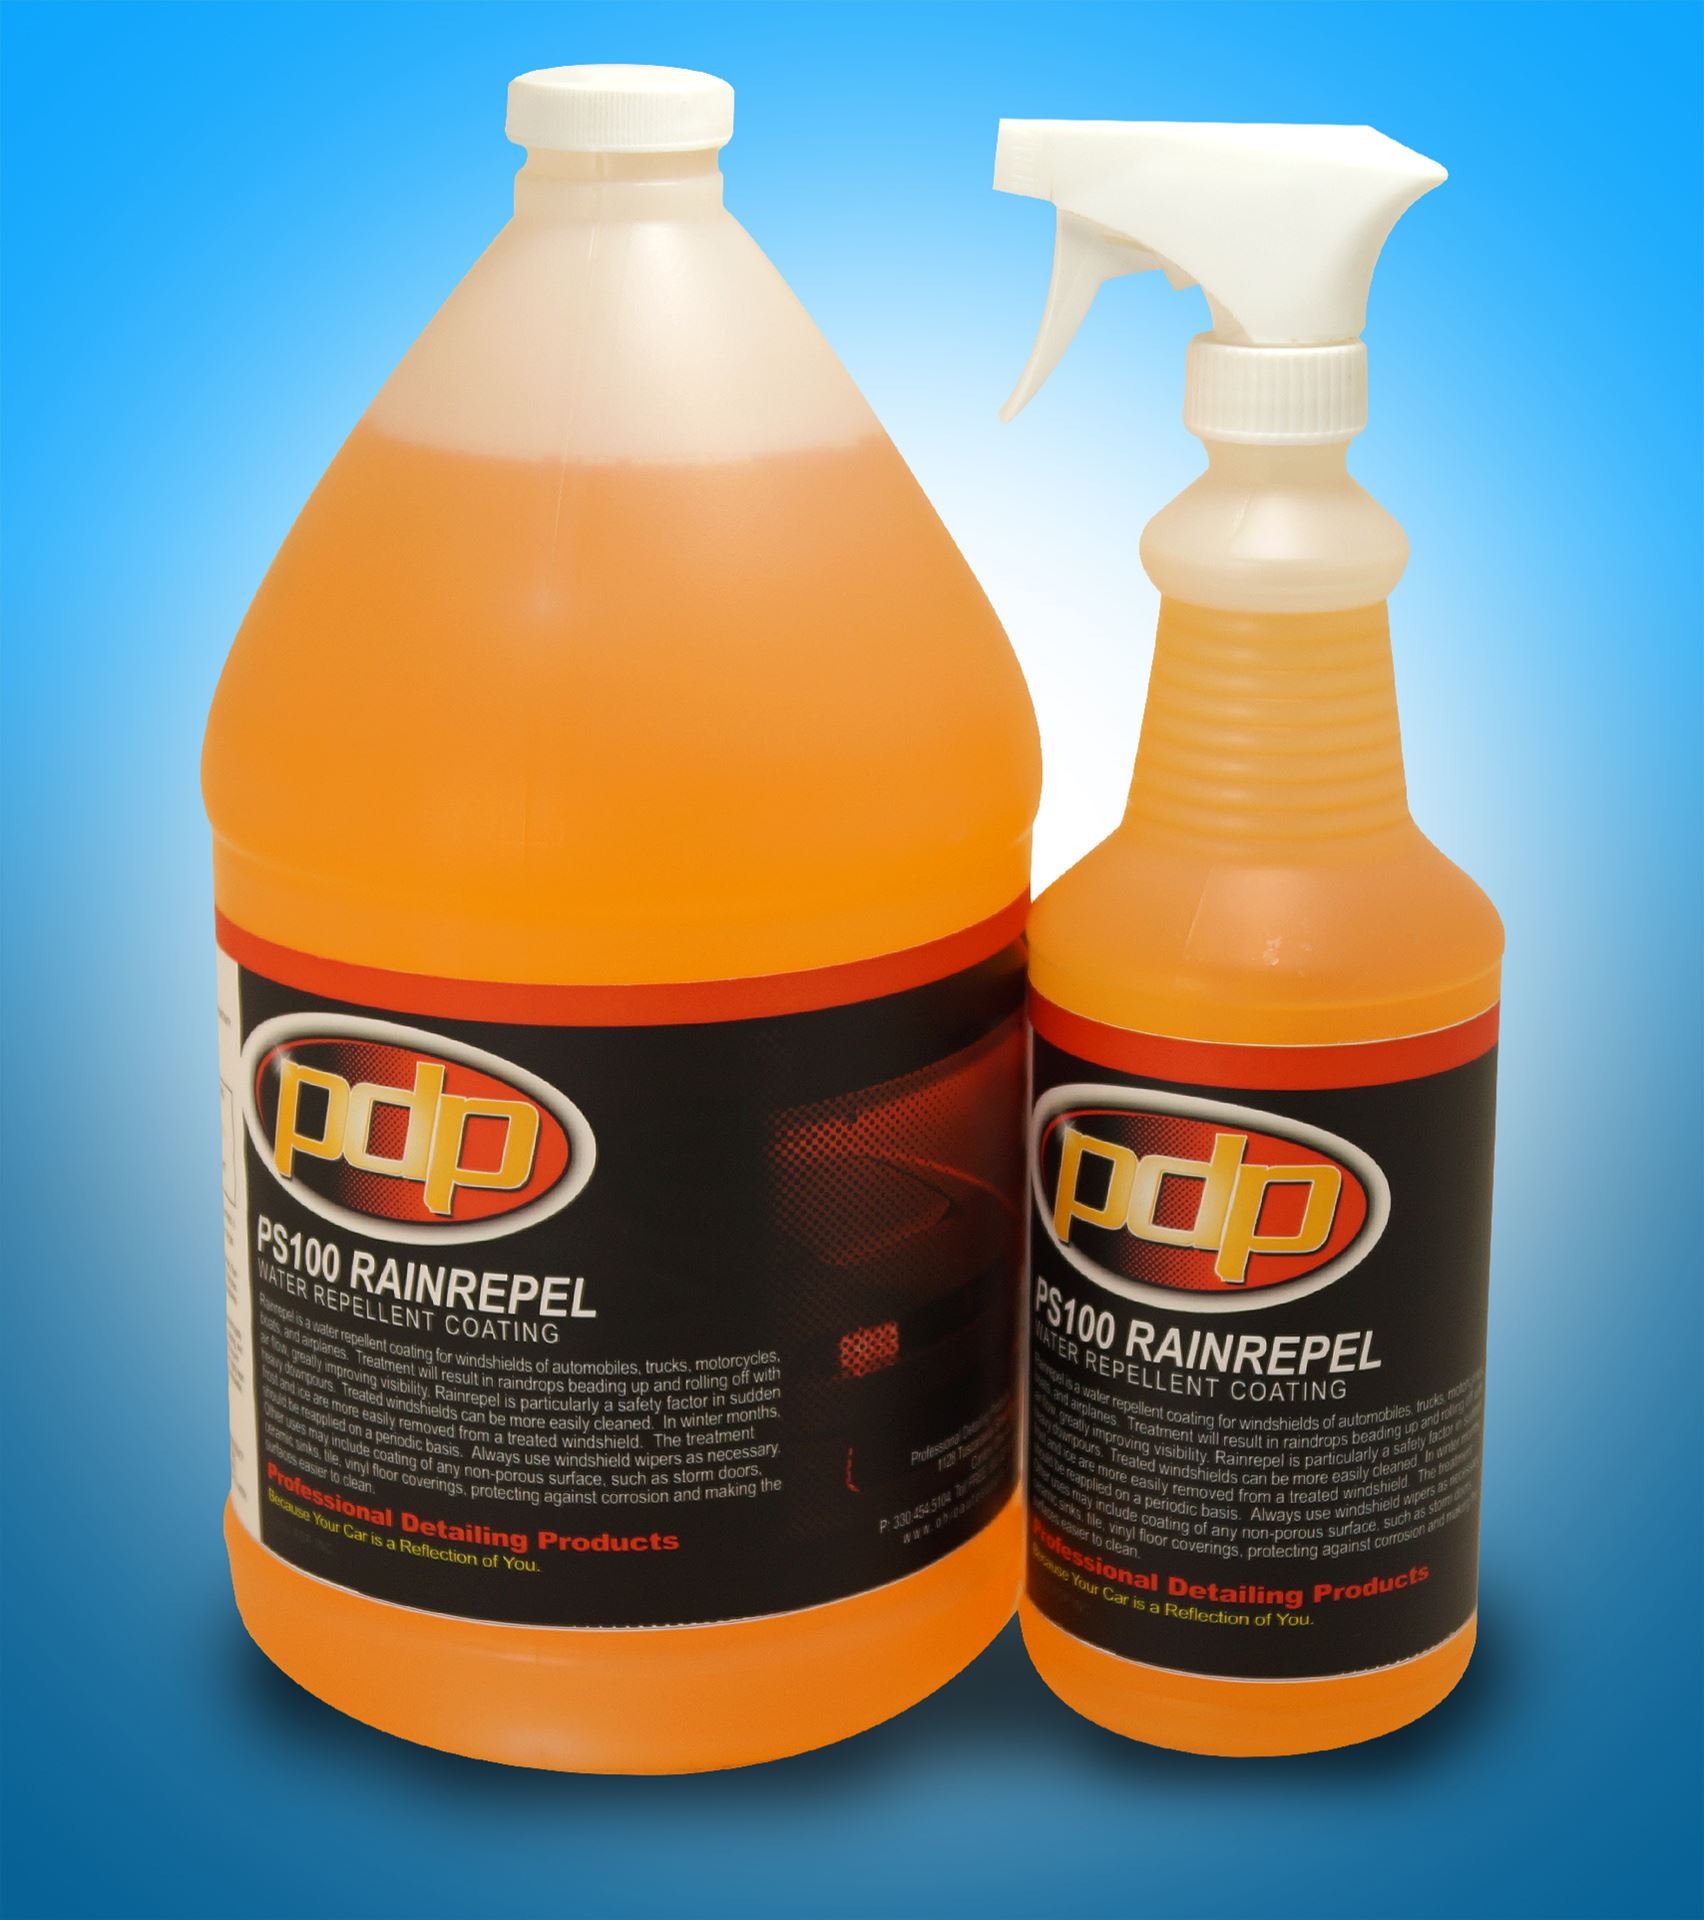 RAIN REPEL PS100. Professional Detailing Products, Because Your Car is a  Reflection of You